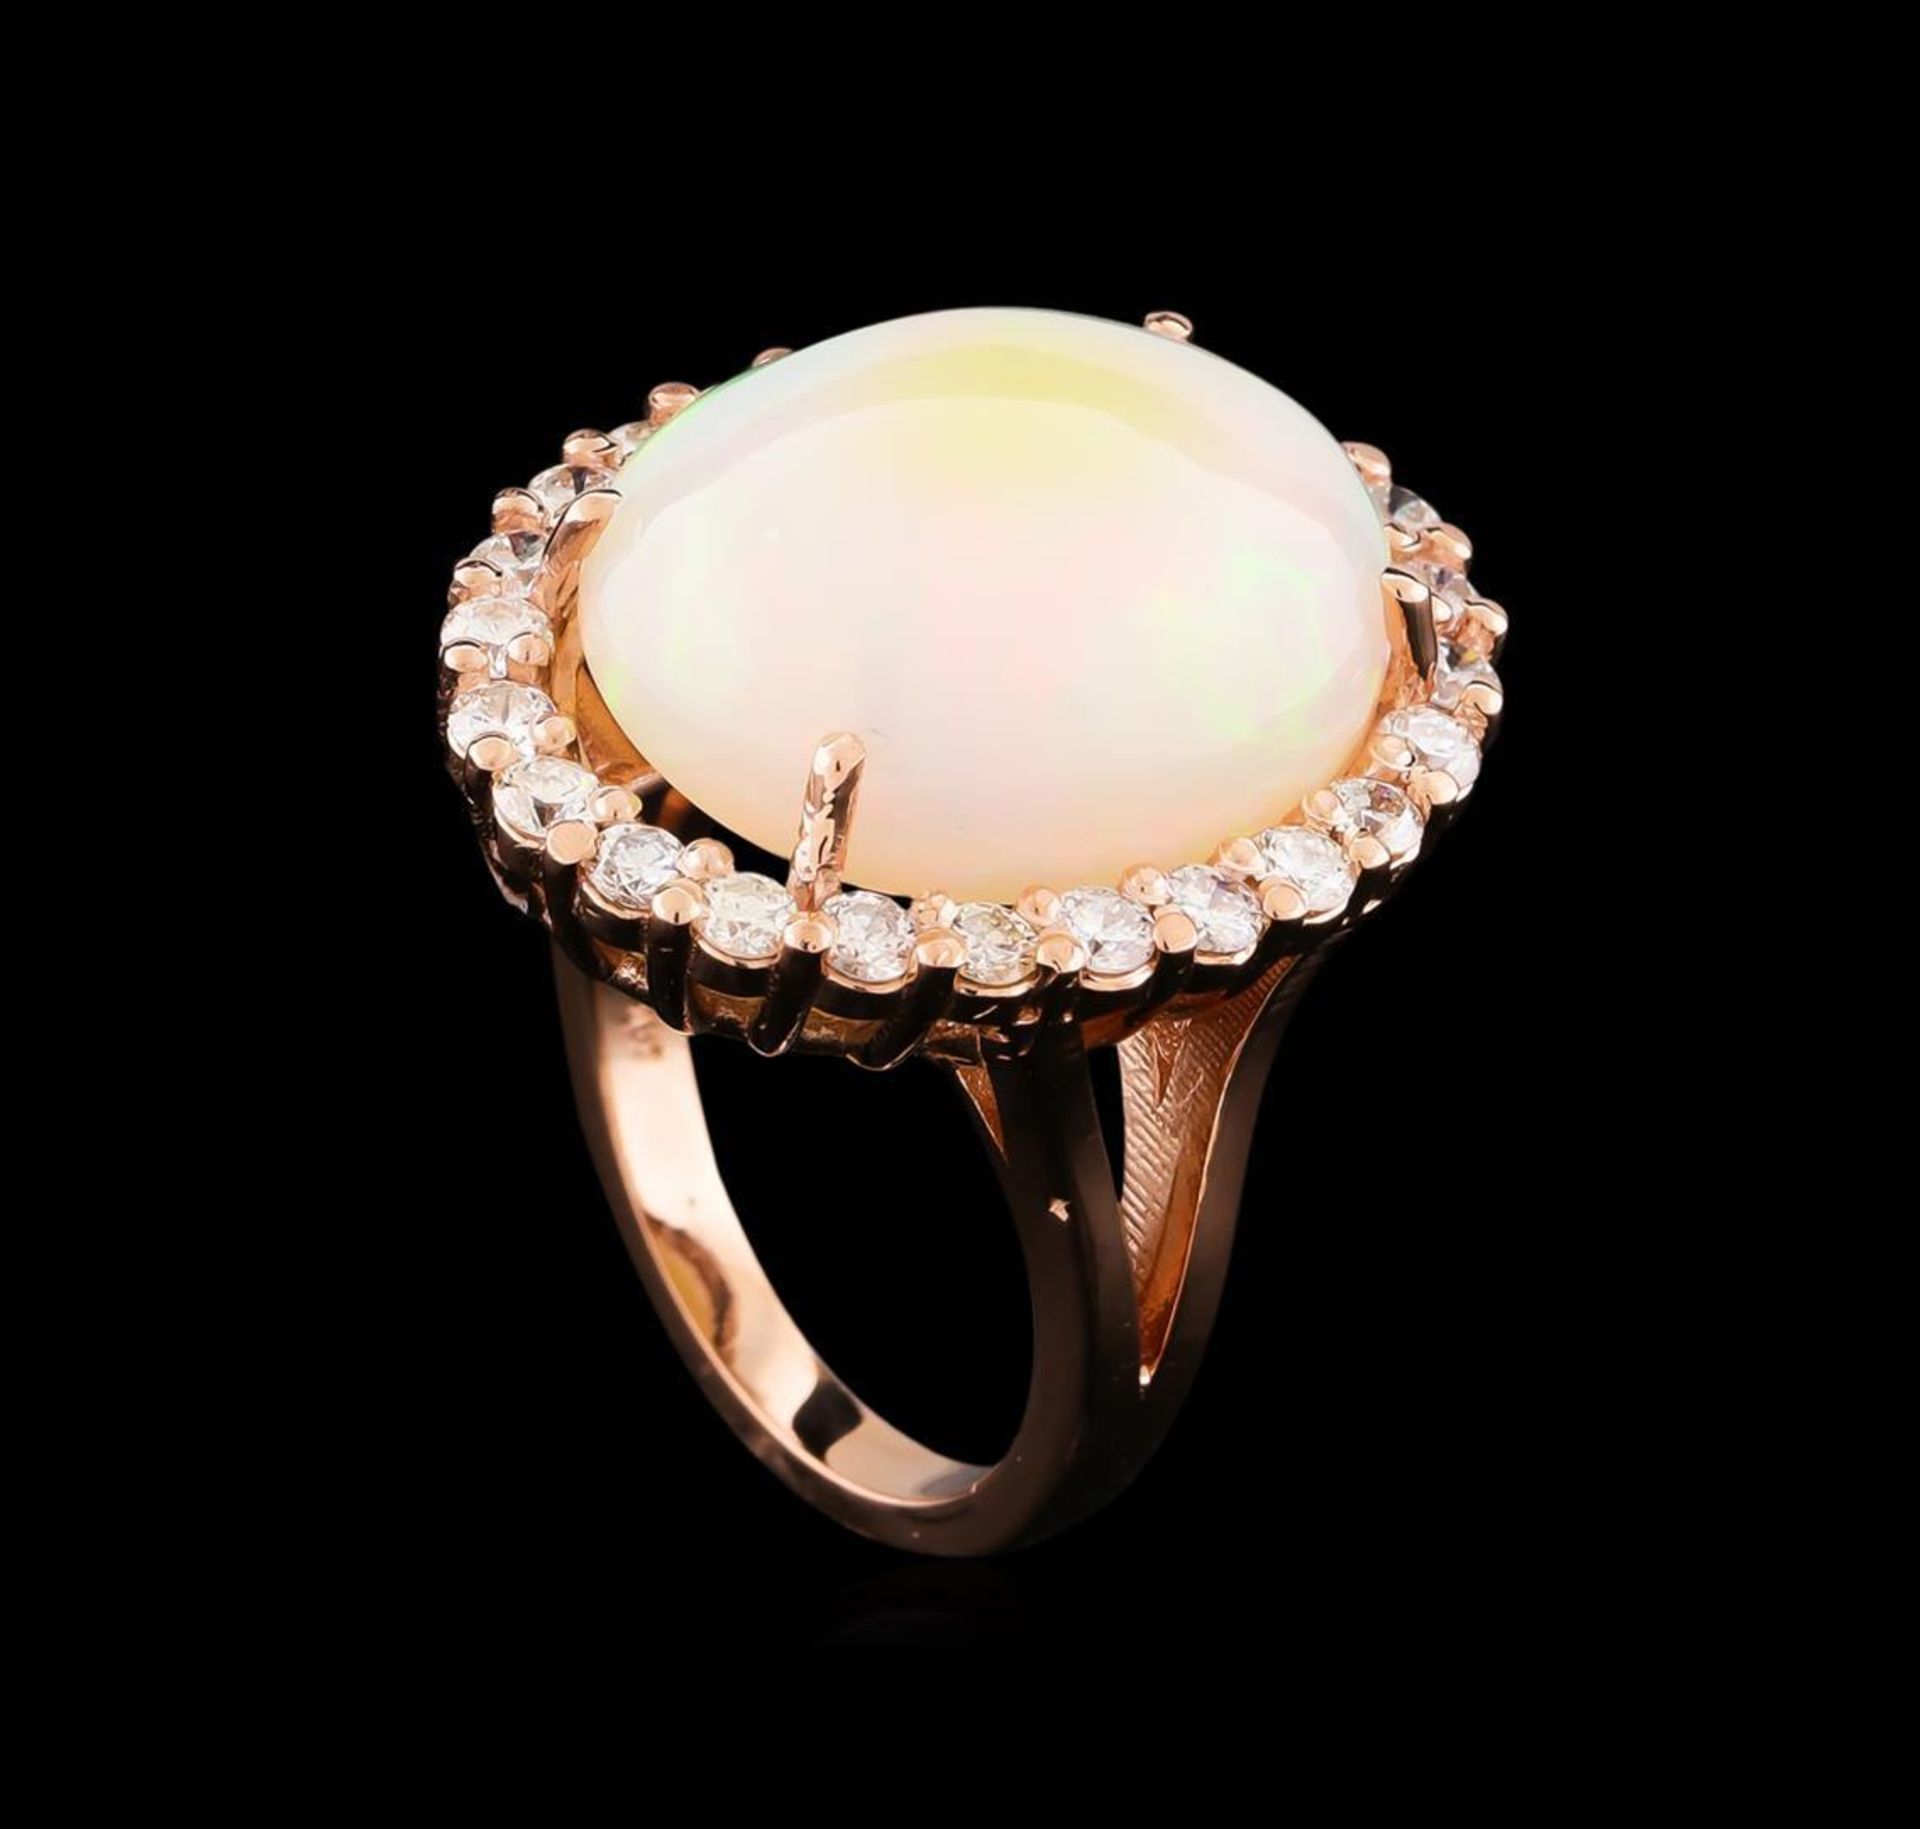 10.00 ctw Opal and Diamond Ring - 14KT Rose Gold - Image 4 of 5